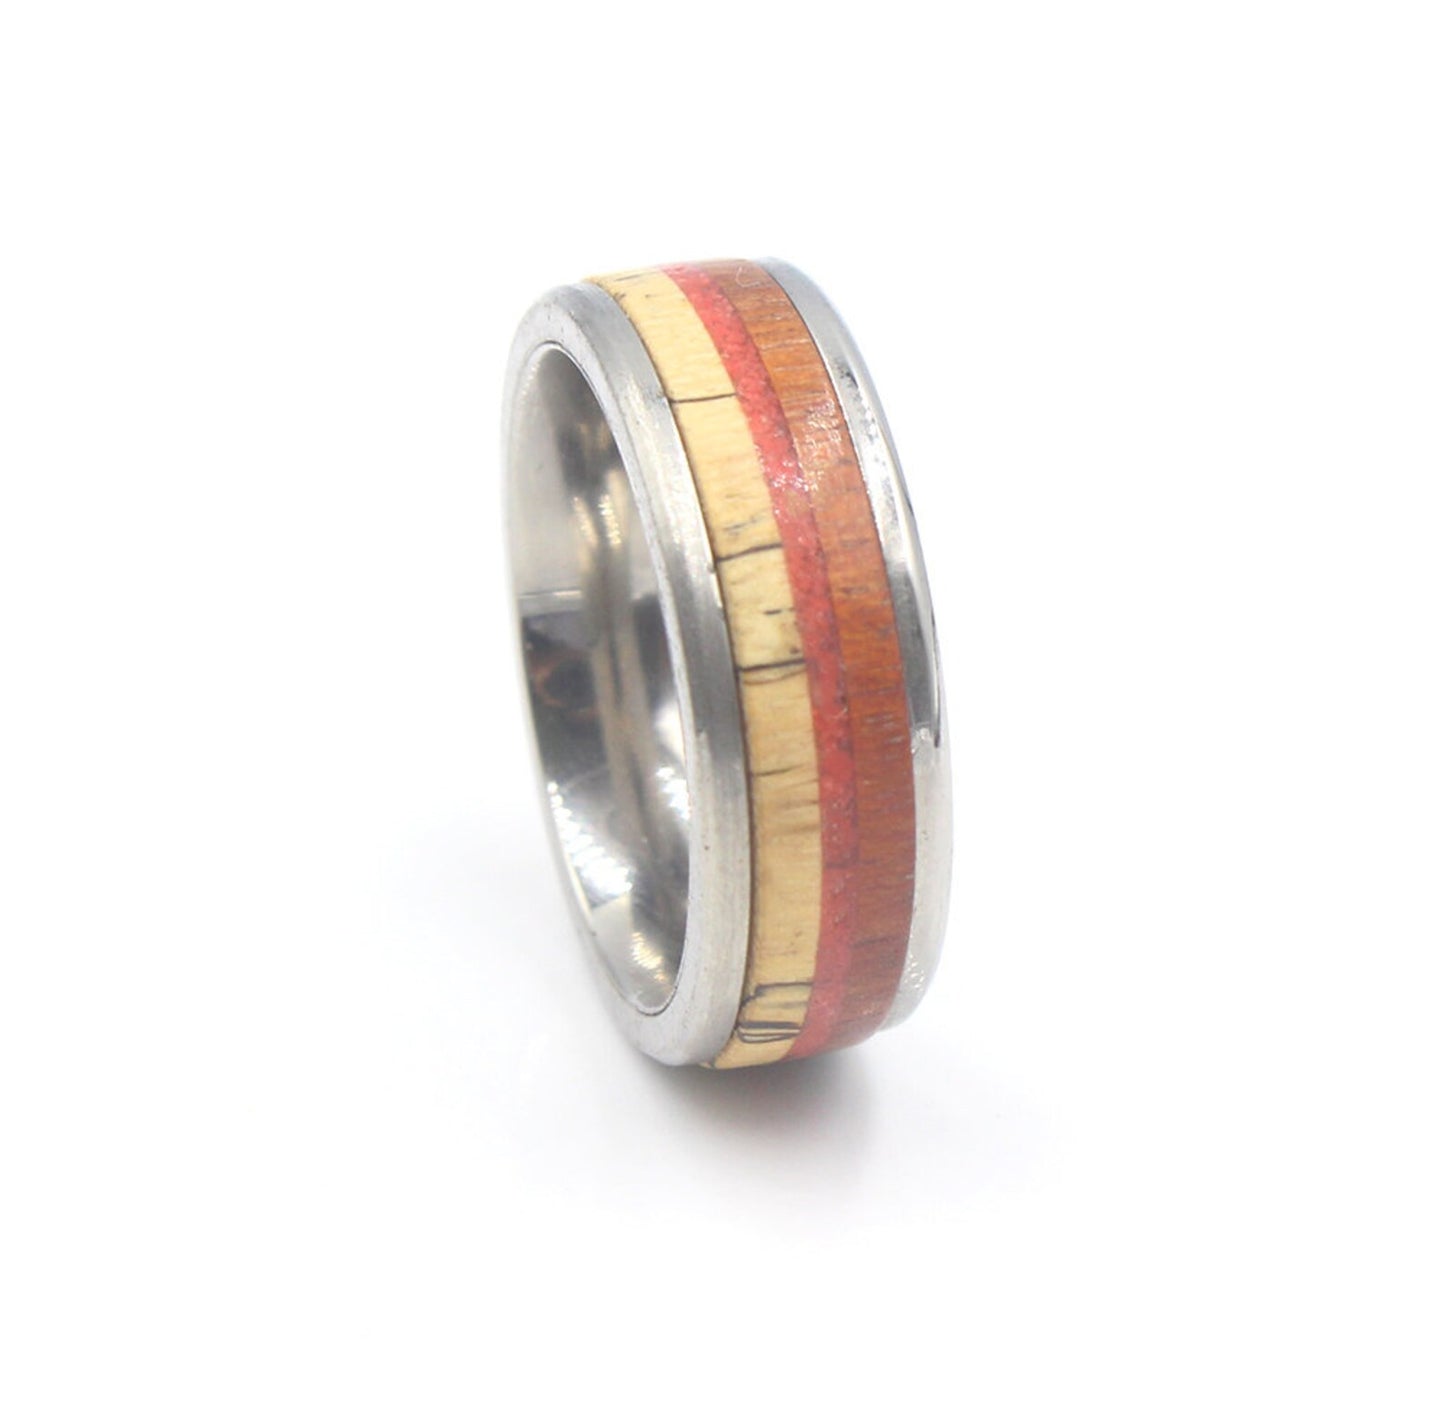 Red Jasper Stone, Rosewood, and Spalted Tamarind Wood Ring